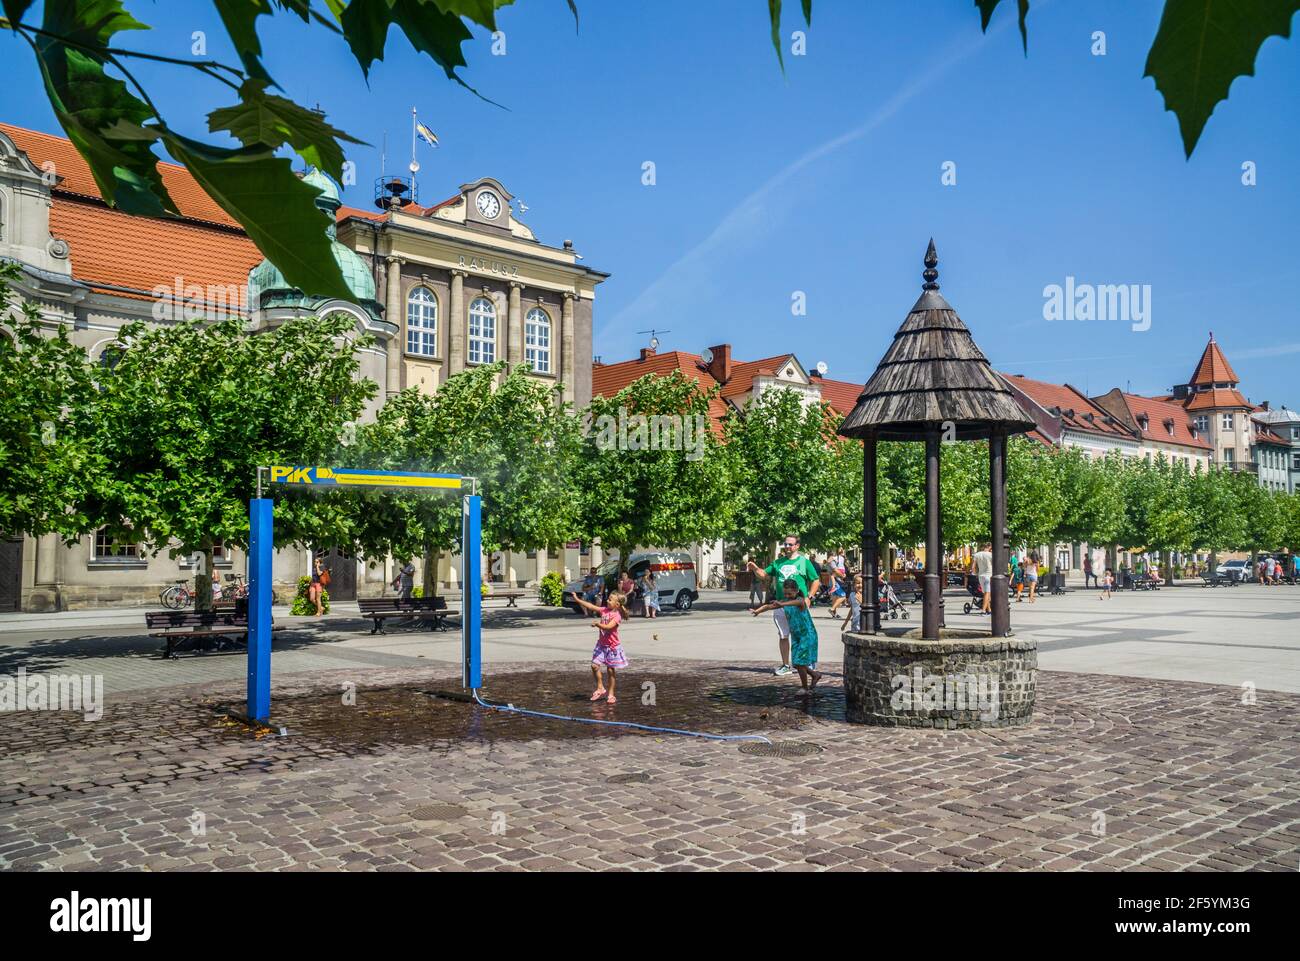 Poland, Silesian Voivodship, Pszczyna (Pless), view of Rynek, the Market Square with Town Hall and fountain Stock Photo